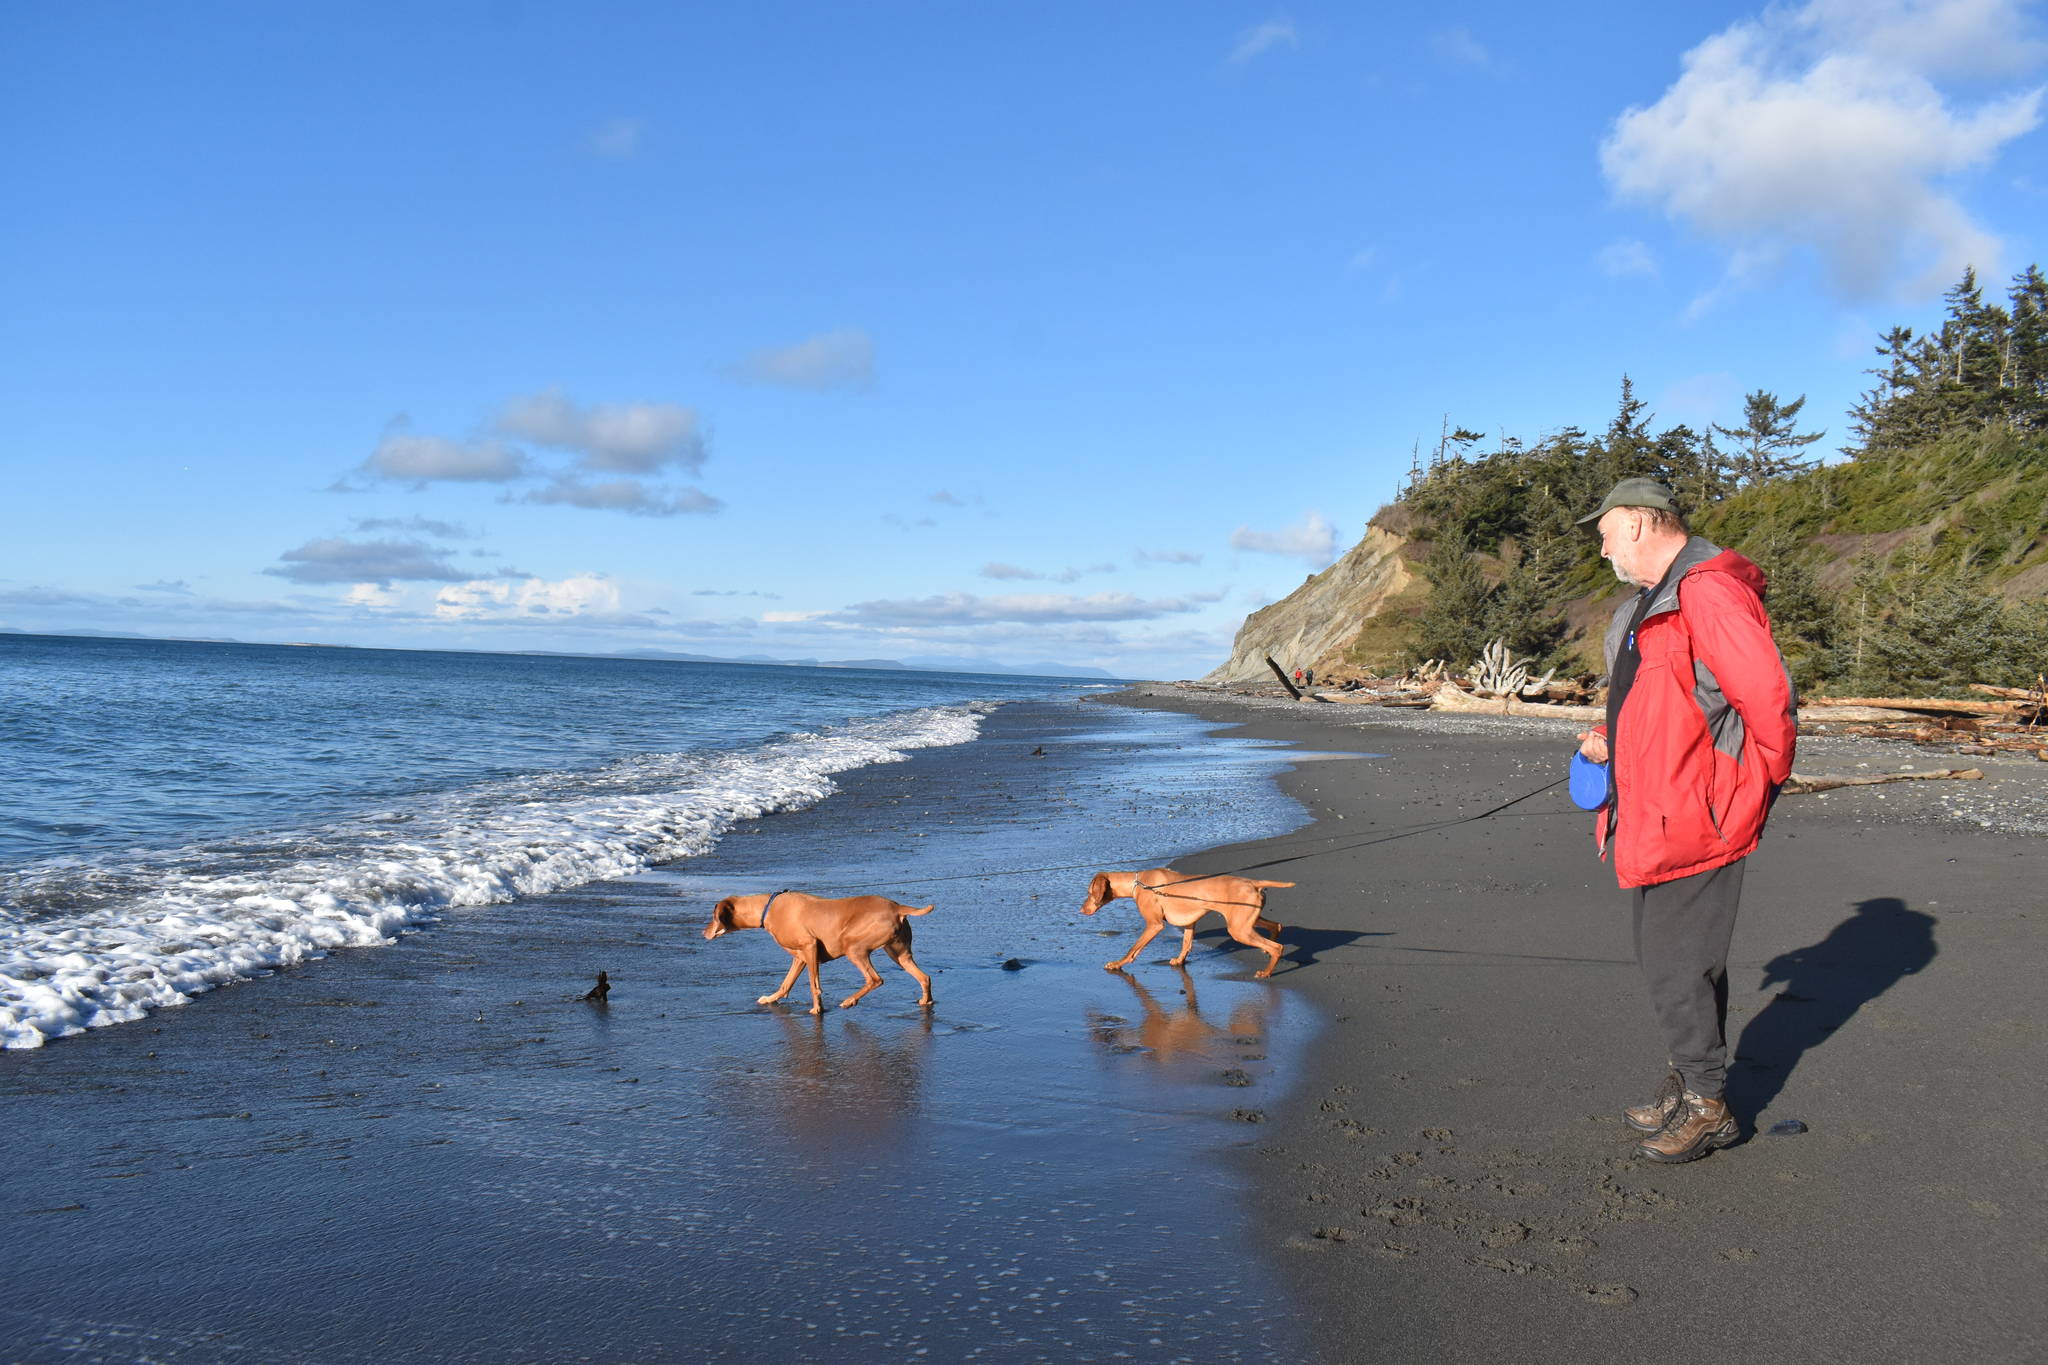 Photo by Emily Gilbert
Chessie and Calamity of Missoula, Montana touched the ocean for the first time at Fort Ebey State Park, according to owner Bill Hoff. The park is one of 28 state parks the Navy has identified as a training site in its new proposal.